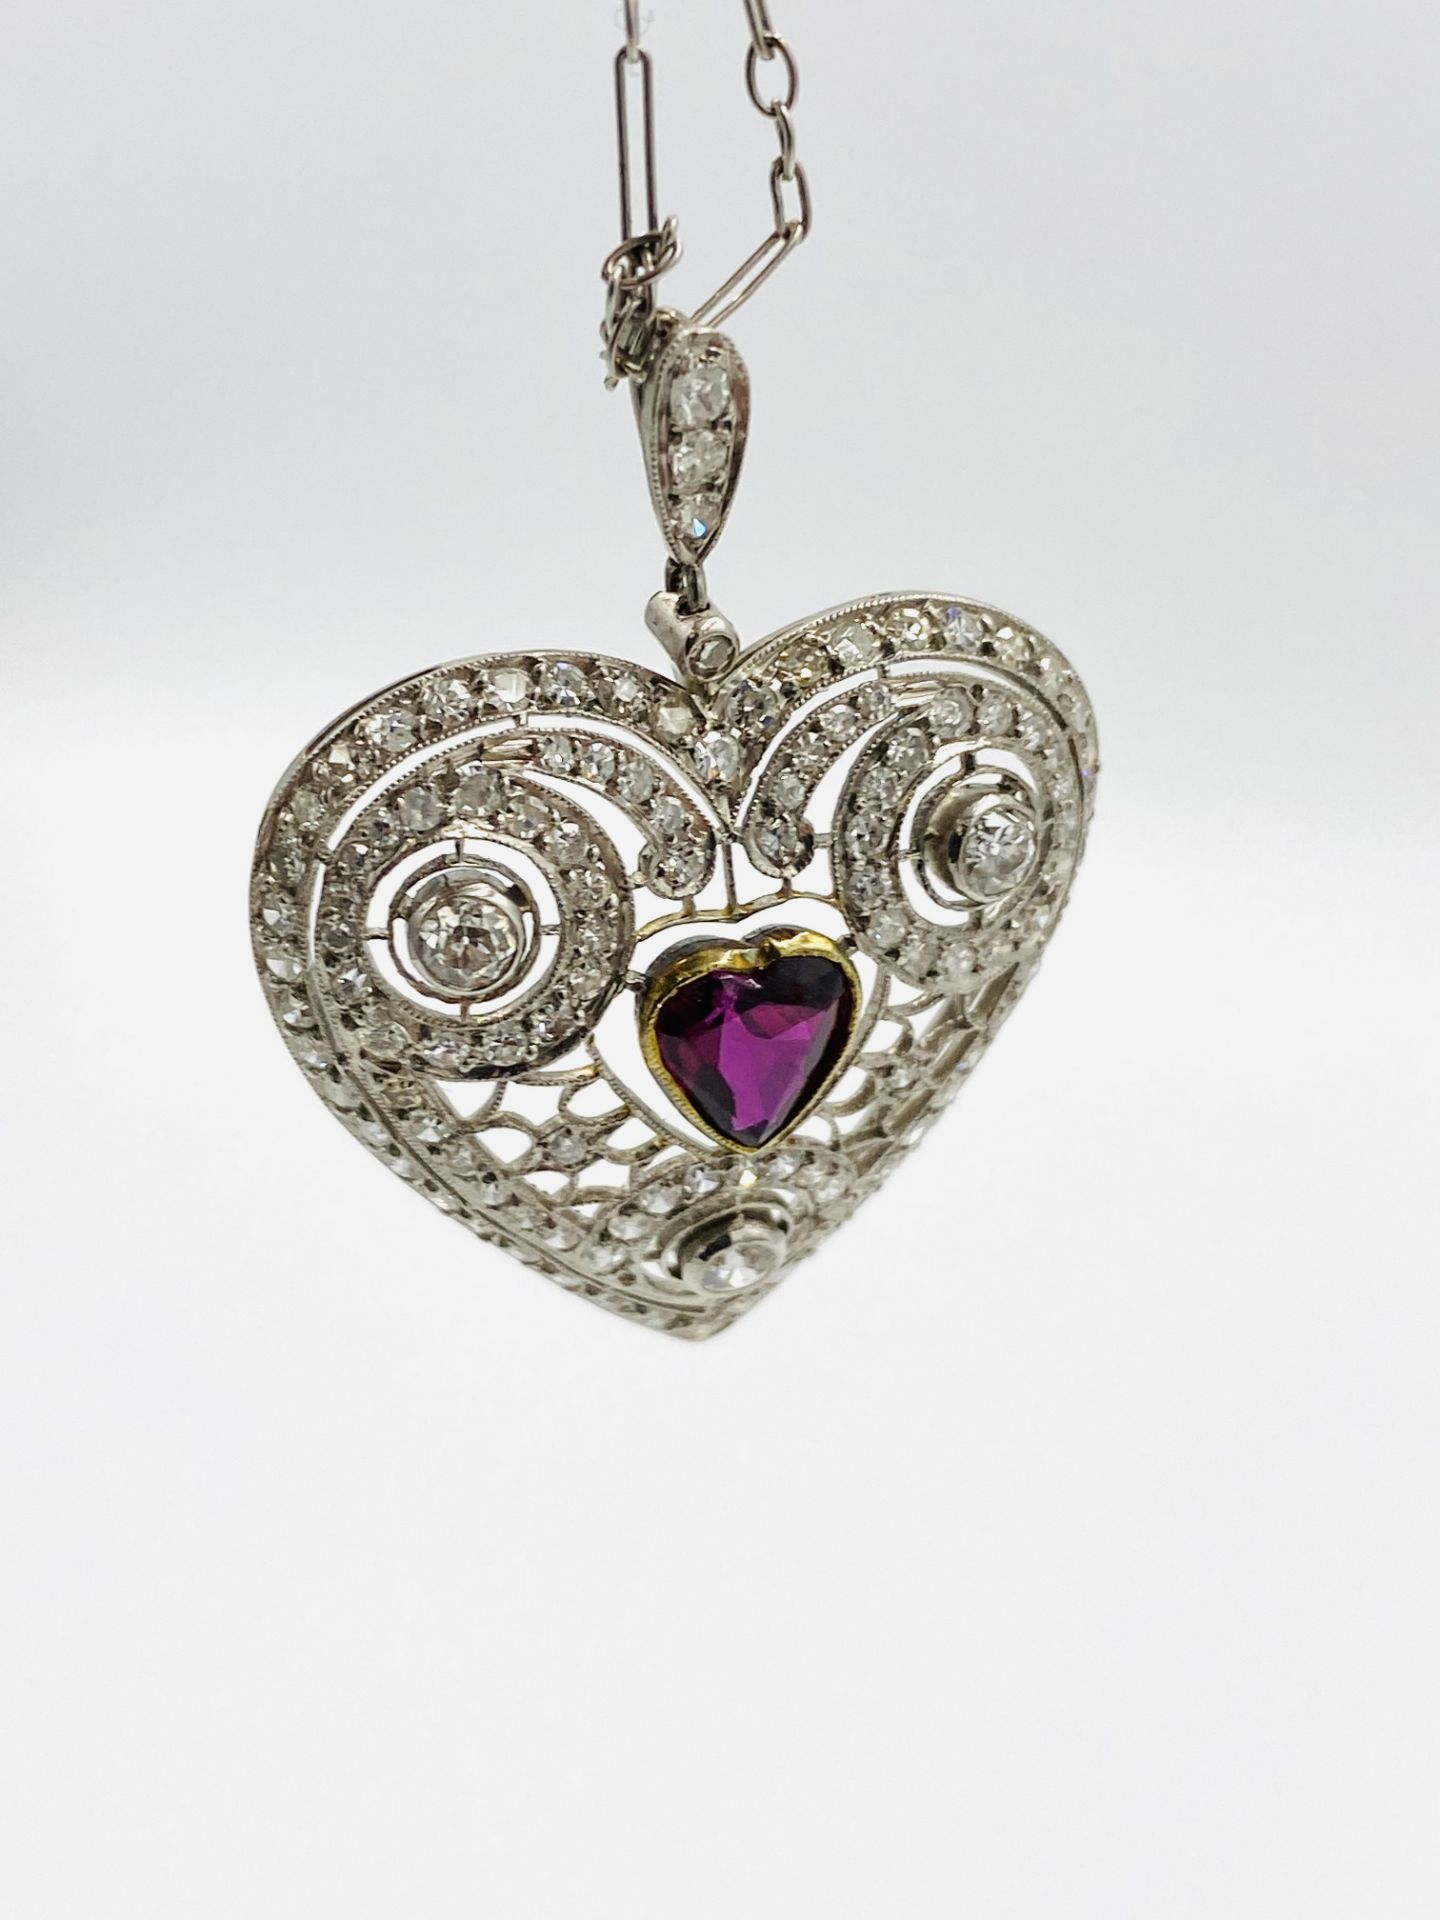 1920's ruby and diamond heart shaped pendant on chain - Image 2 of 4